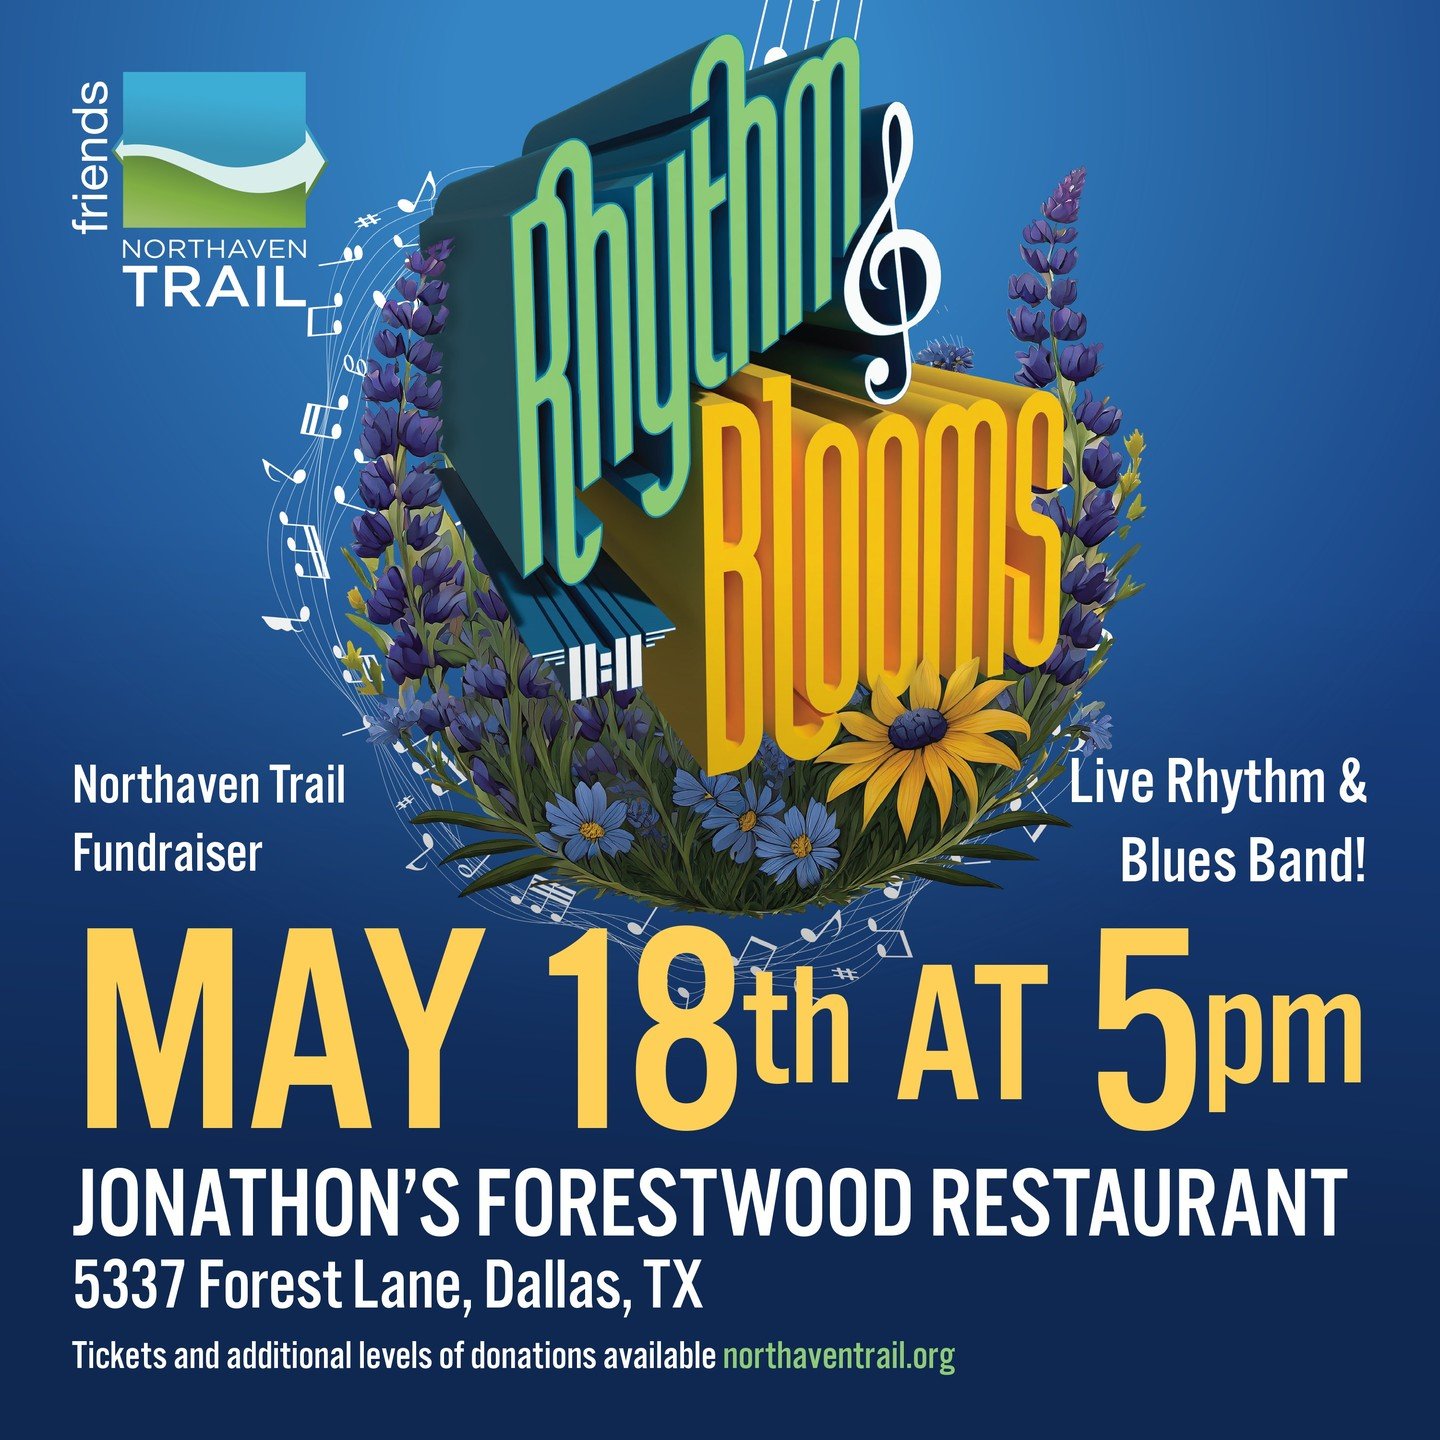 Thursday, May 9th is the LAST DAY for early bird ticket pricing. Get yours before the price goes up. Visit the link in our bio to learn more. 

https://northaventrail.org/events/2024/5/18/rhythm-and-blooms

#northaventrail #dallasparks #livemusic